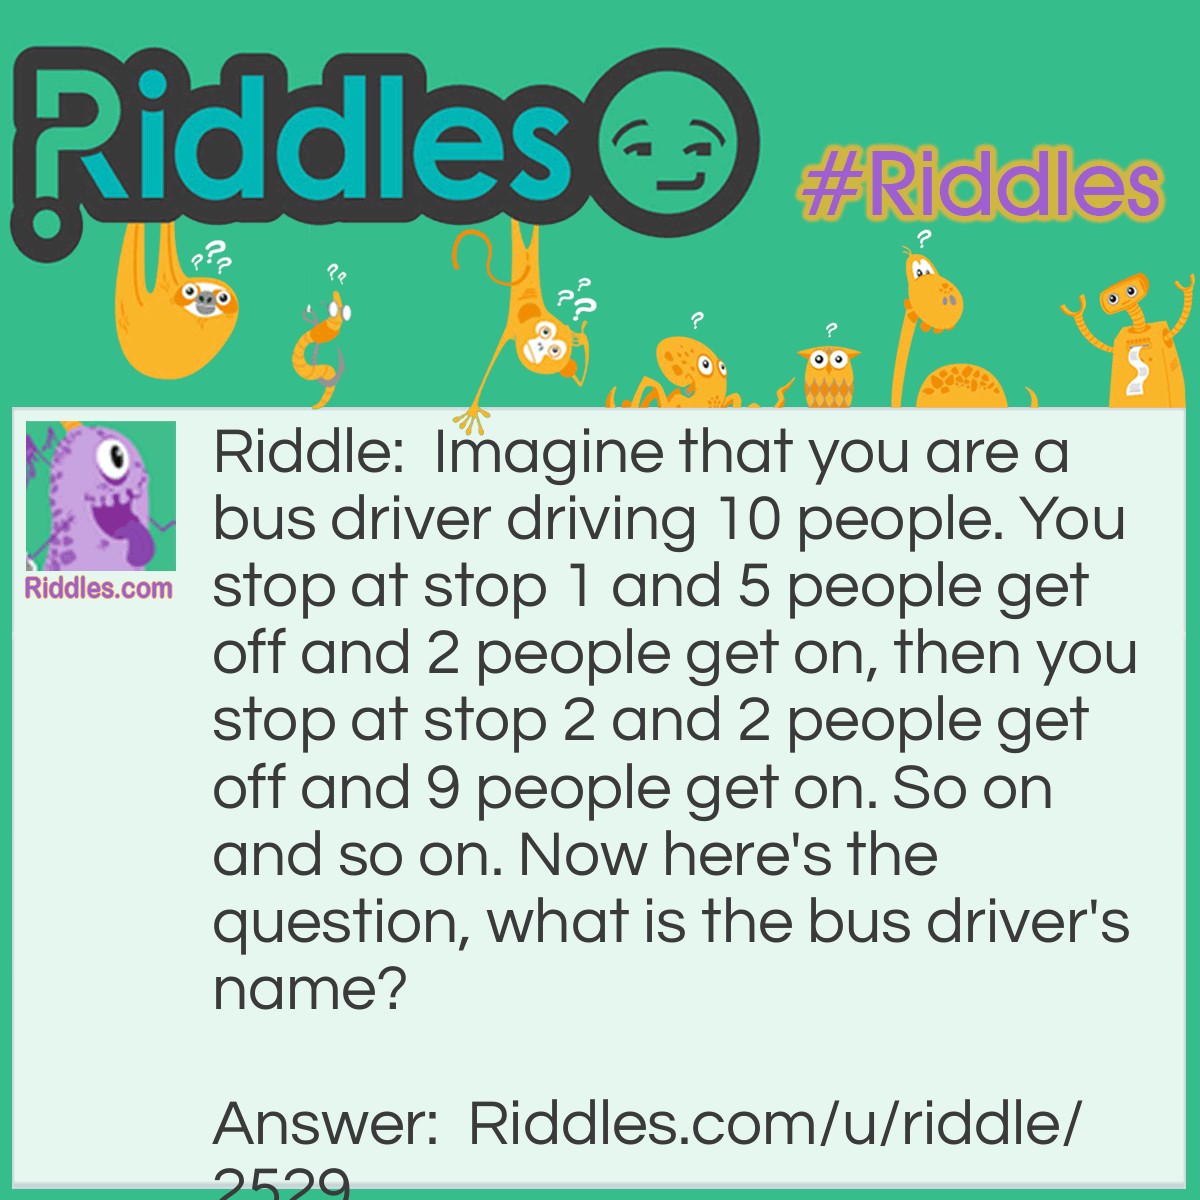 Riddle: Imagine that you are a bus driver driving 10 people. You stop at stop 1 and 5 people get off and 2 people get on, then you stop at stop 2 and 2 people get off and 9 people get on. So on and so on. Now here's the question, what is the bus driver's name? Answer: Whatever your name is! I said imagine you are a bus driver!